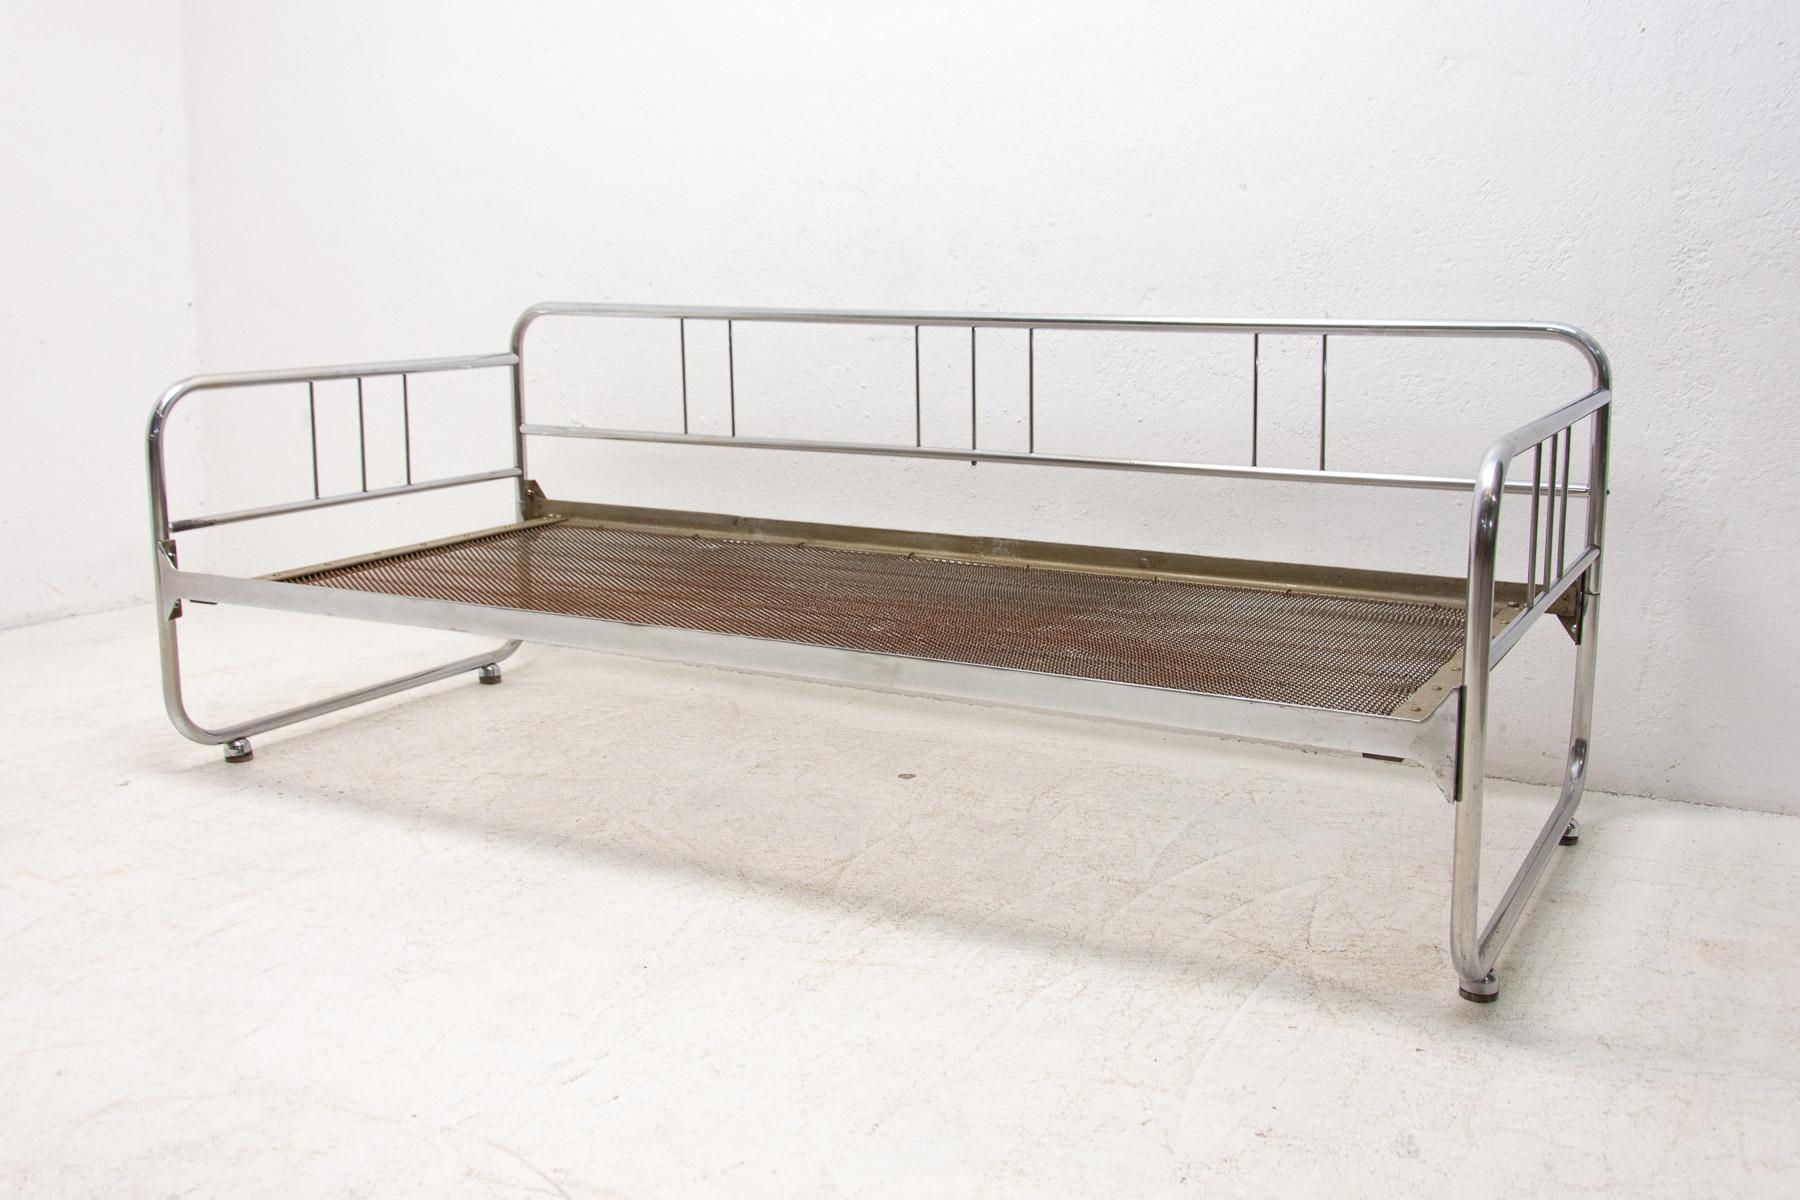 Chrome tubular steel sofa, designed probably by Hynek Gottwald during the Bauhaus period in the 1930s, This sofa was made in the 1940´s.  The chrome is overall in good Vintage condition, showing some signs of age and use.

Height: 69 cm

lenght: 192